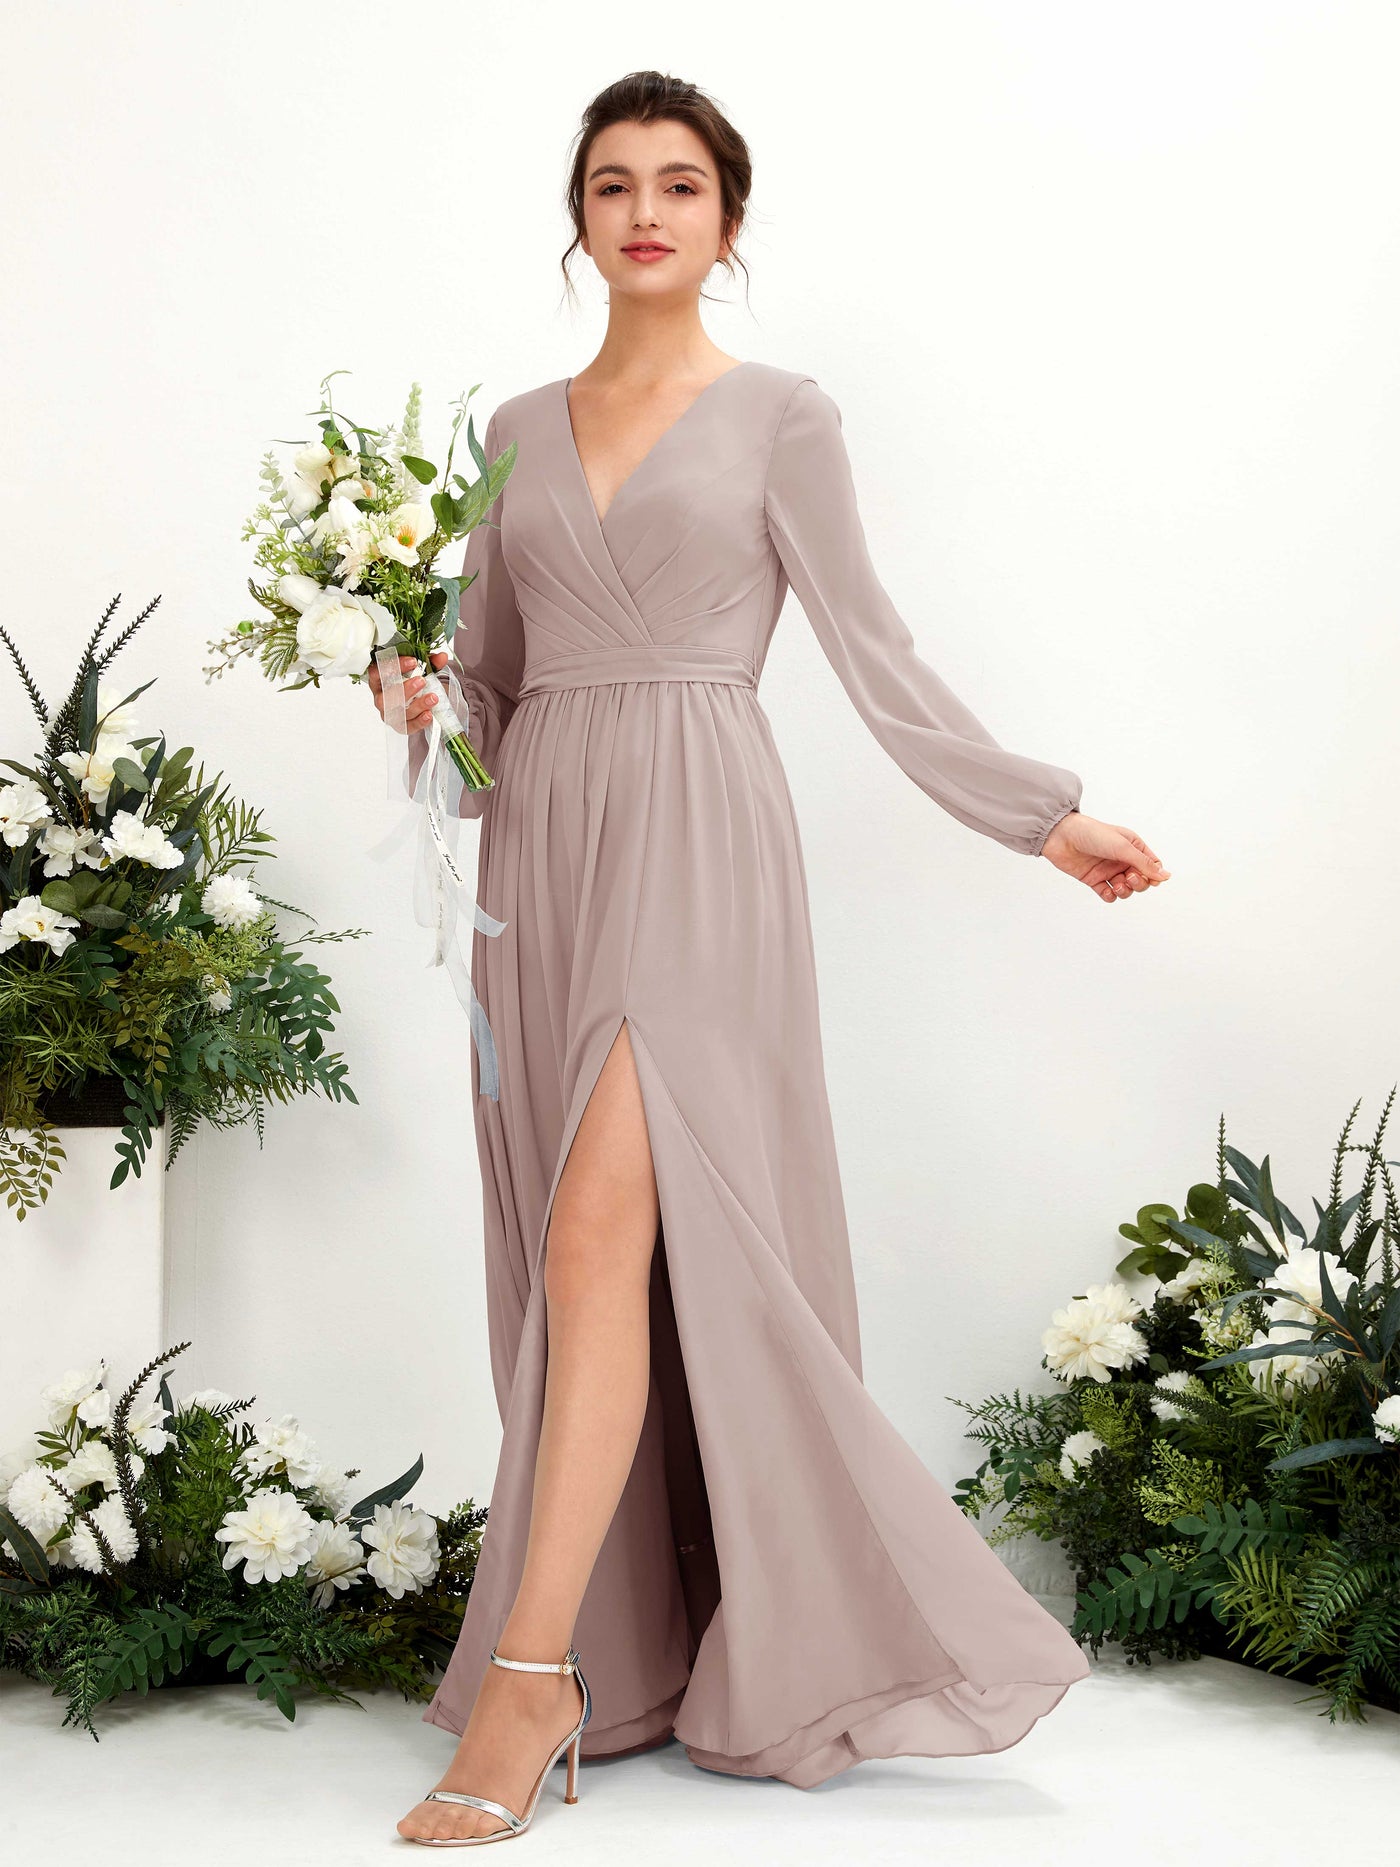 Taupe Bridesmaid Dresses Bridesmaid Dress A-line Chiffon V-neck Full Length Long Sleeves Wedding Party Dress (81223824)#color_taupe